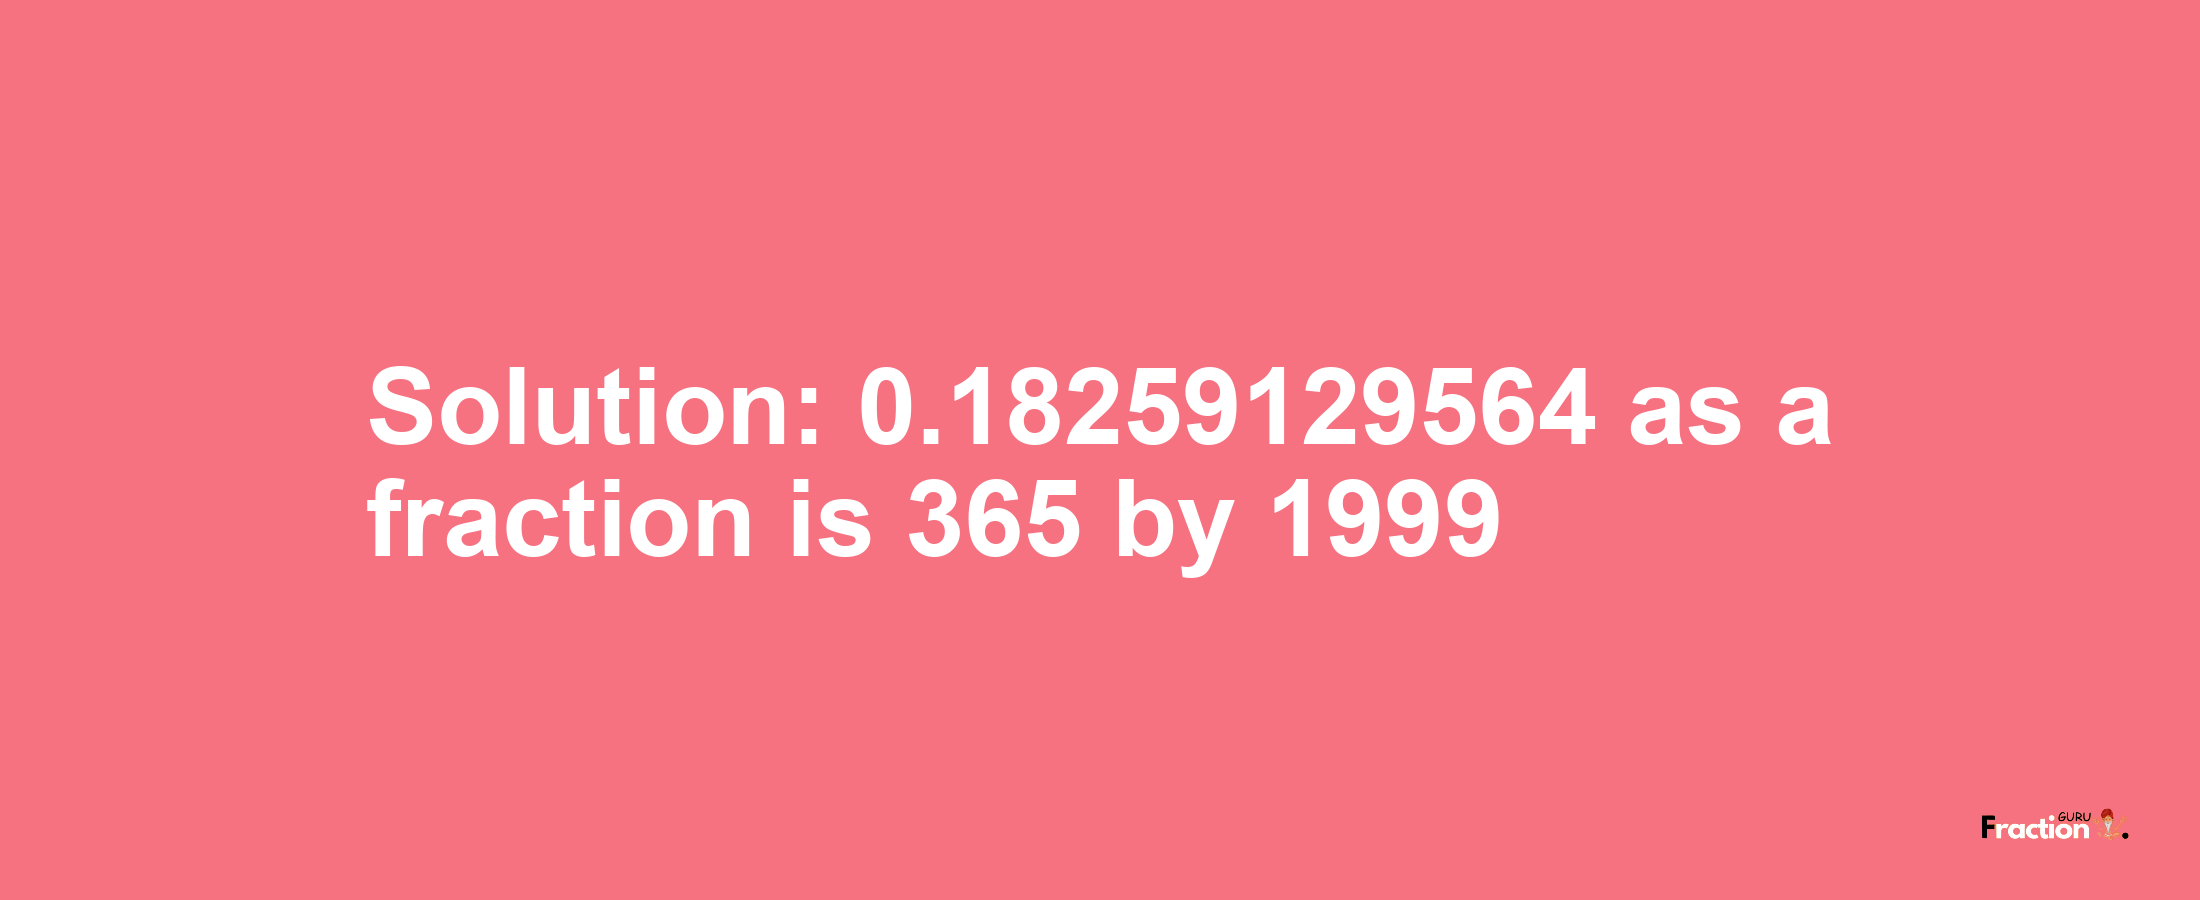 Solution:0.18259129564 as a fraction is 365/1999